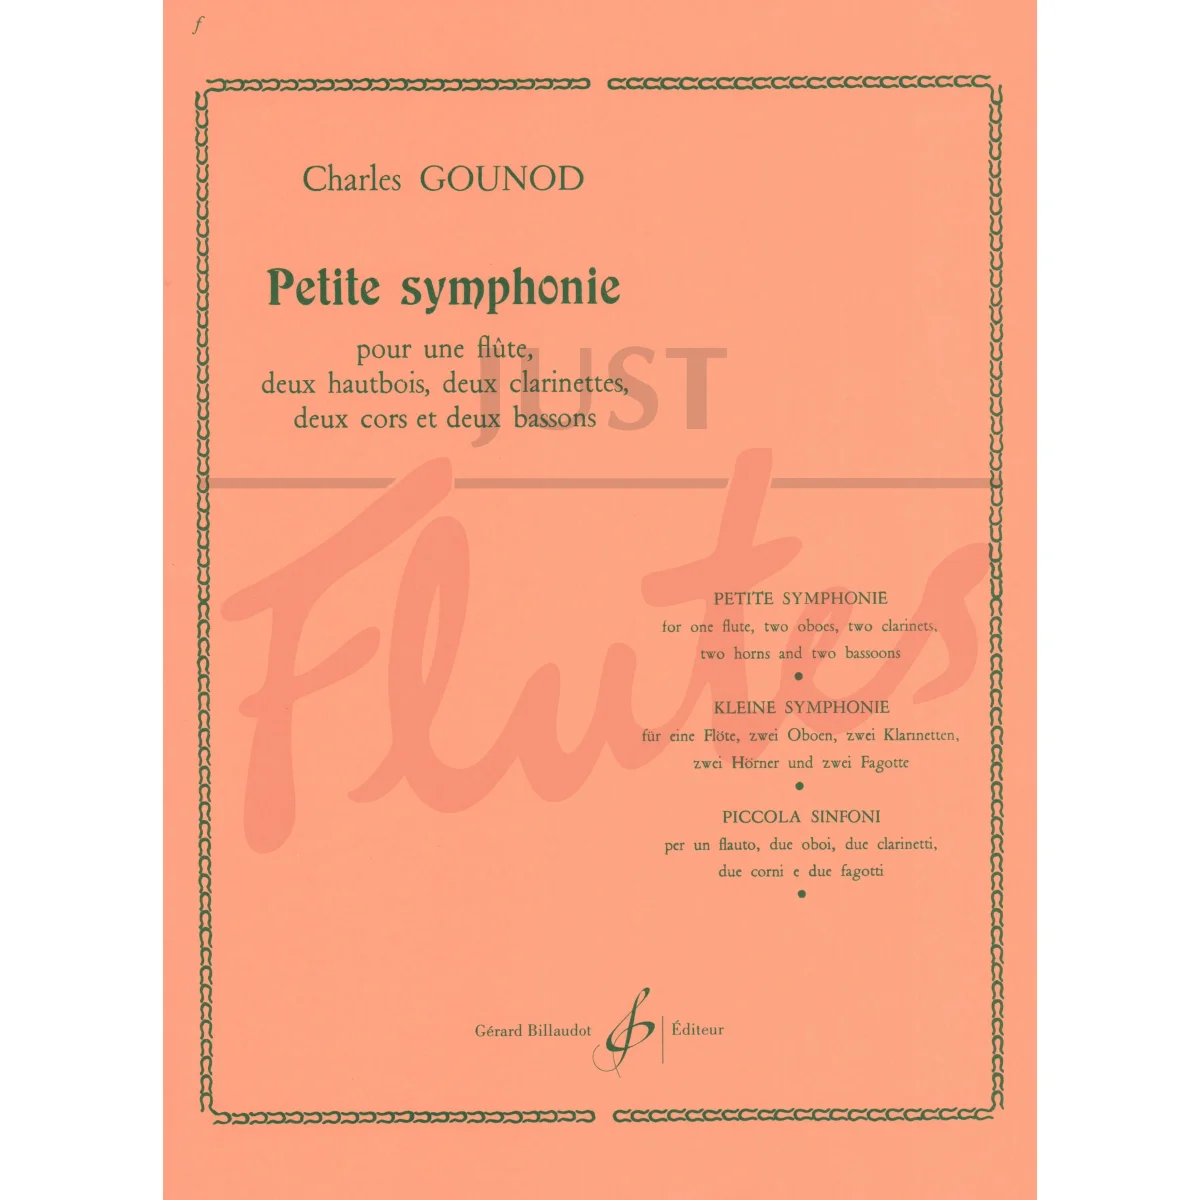 Petite Symphonie for Flute, Two Oboes, Two Clarinets, Two French Horns and Two Bassoons